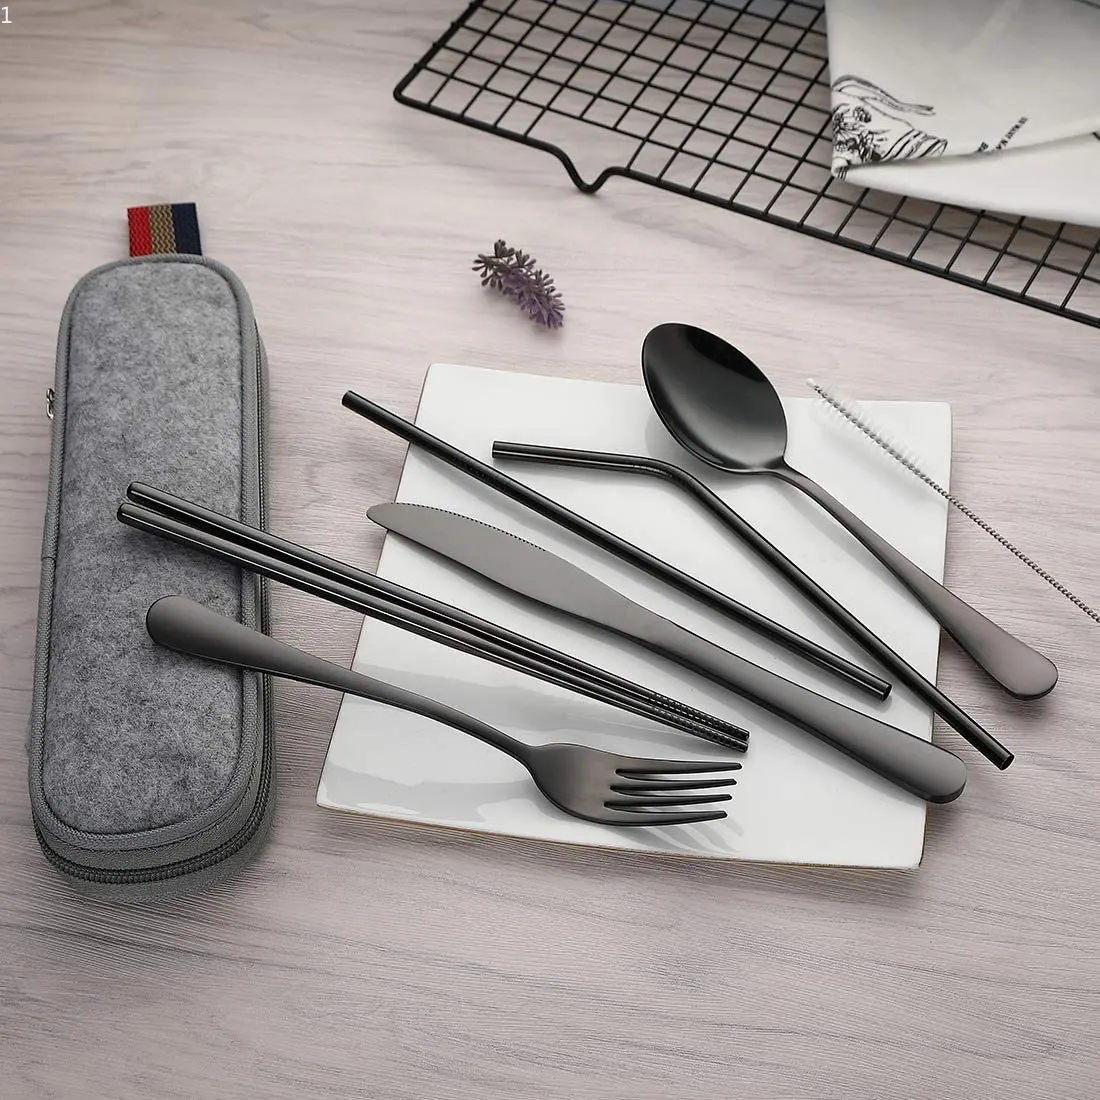 

Set 8-Piece Portable Utensils Travel Camping Cutlery Including Knife Fork Spoon Chopsticks Cleaning Brush Straws Portable Case